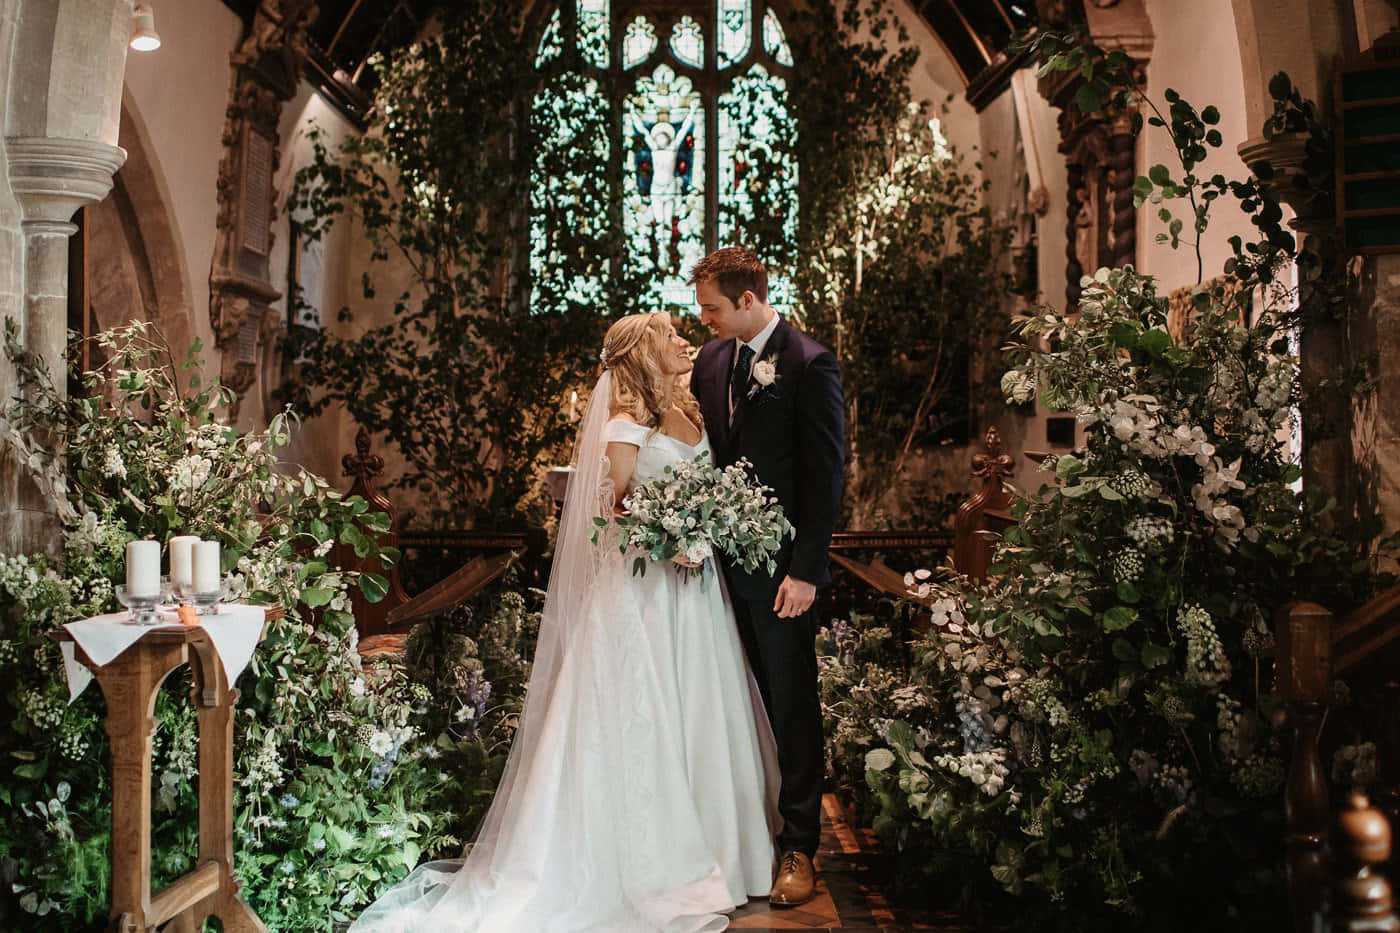 A rustic and romantic wedding scene, the perfect backdrop for a special day